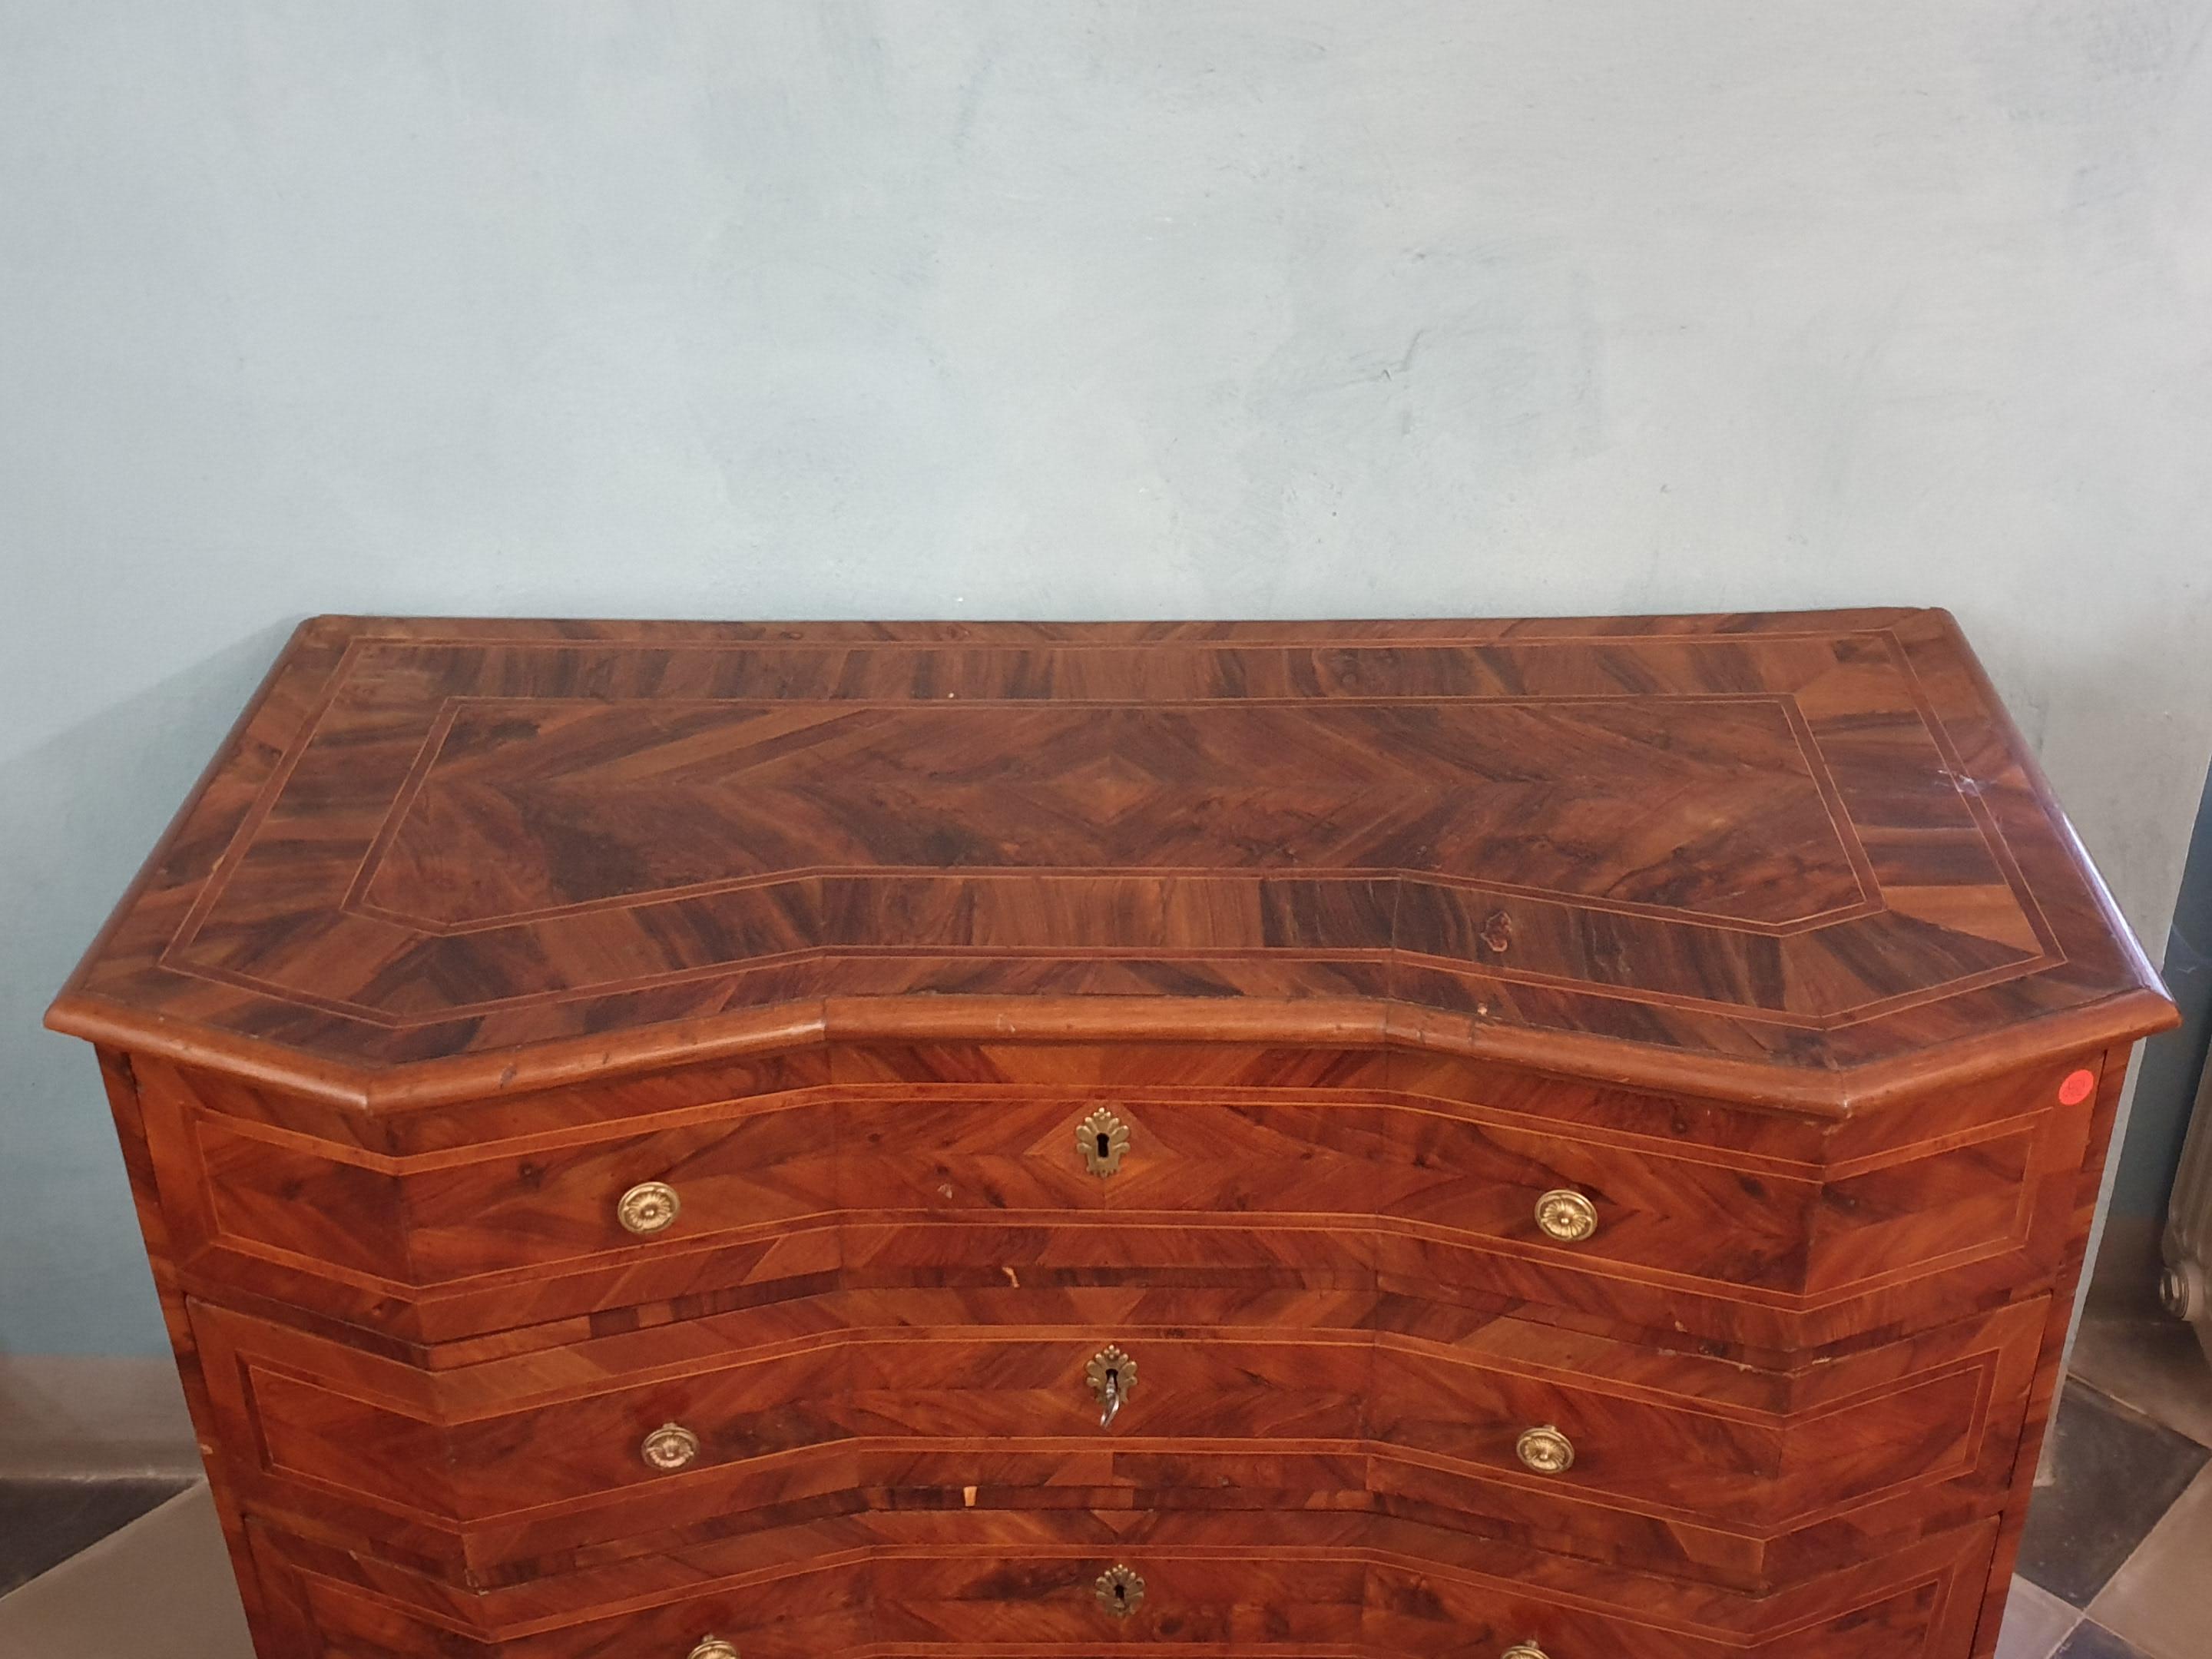 18th Century Baroque Walnut and Inlaid Olive Wood and Rosewood Italian Dresser 

Spectacular Italian walnut cassettone inlaid with olive and rose wood
very nice condition with original locks and drawers.